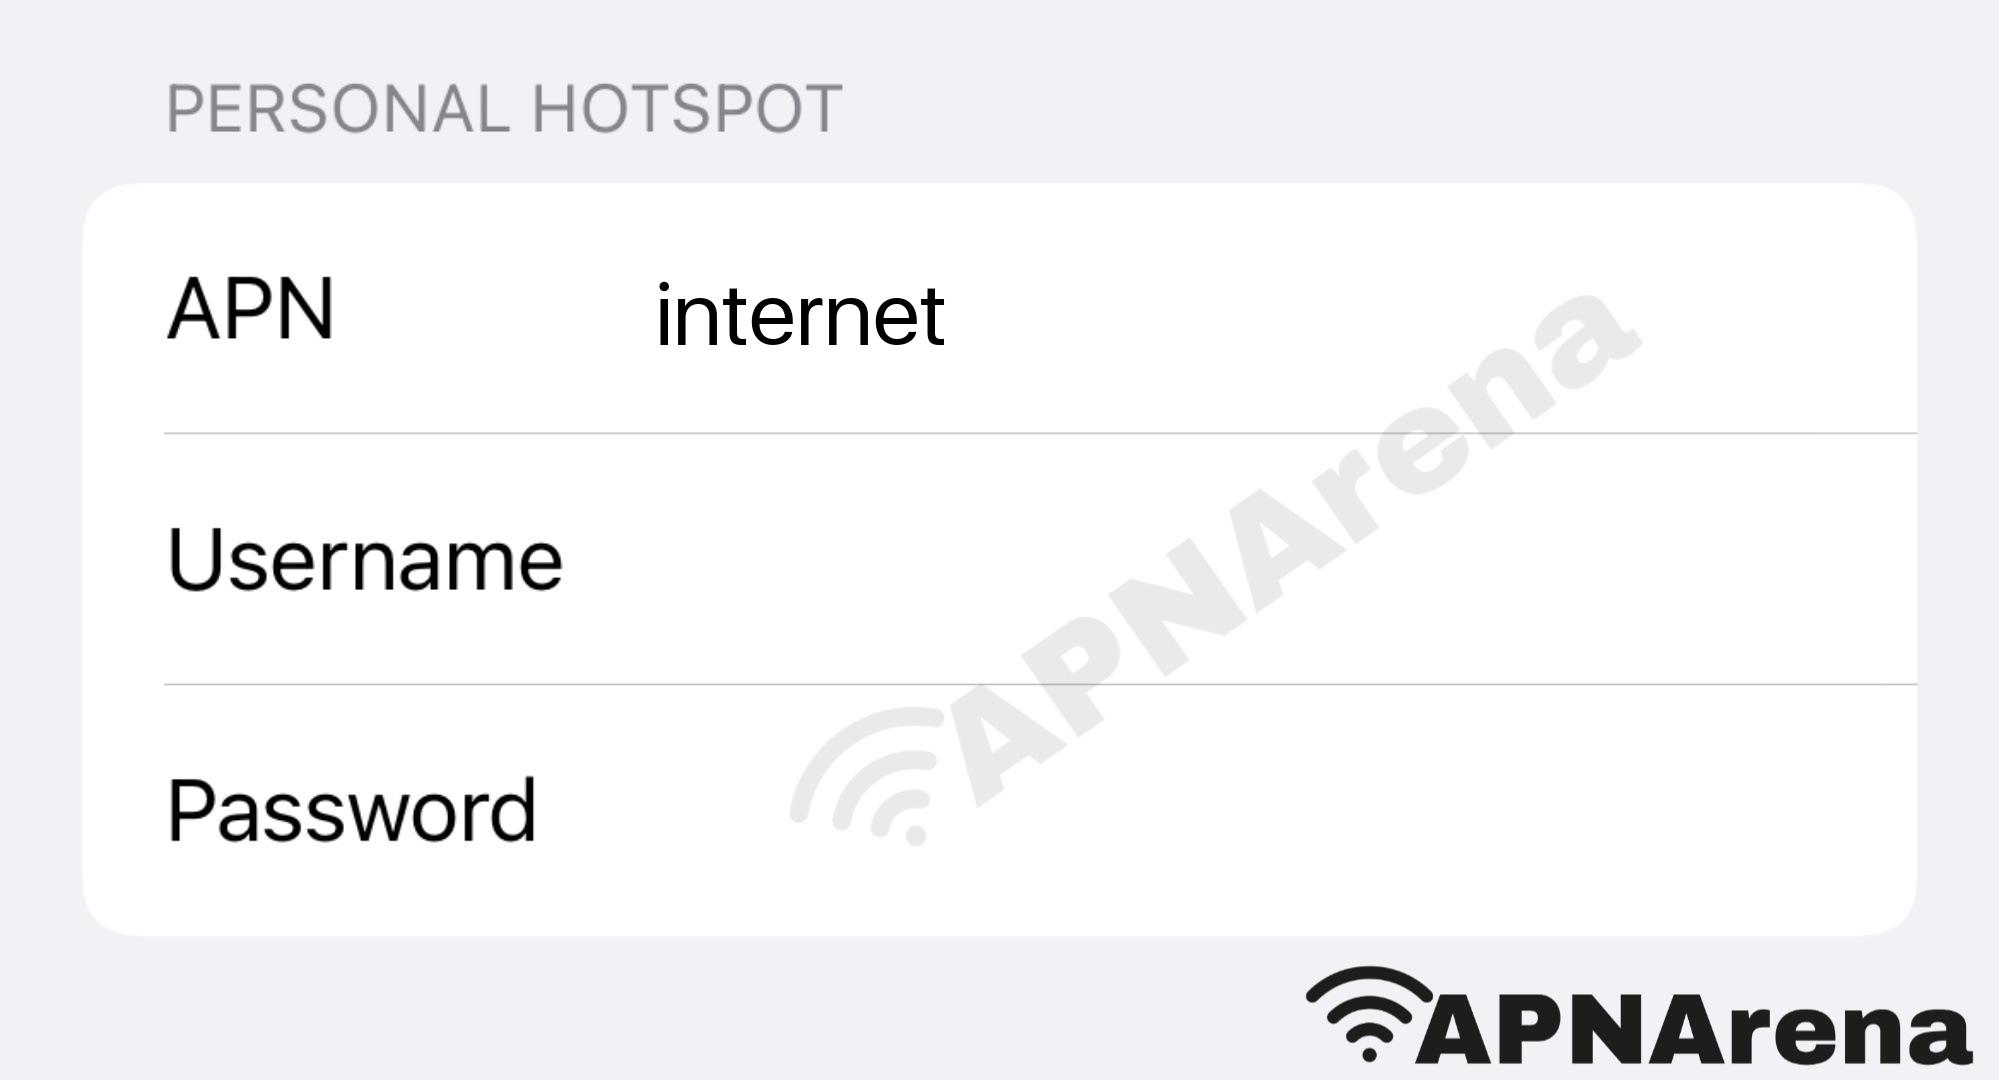 iQ Cellular Personal Hotspot Settings for iPhone